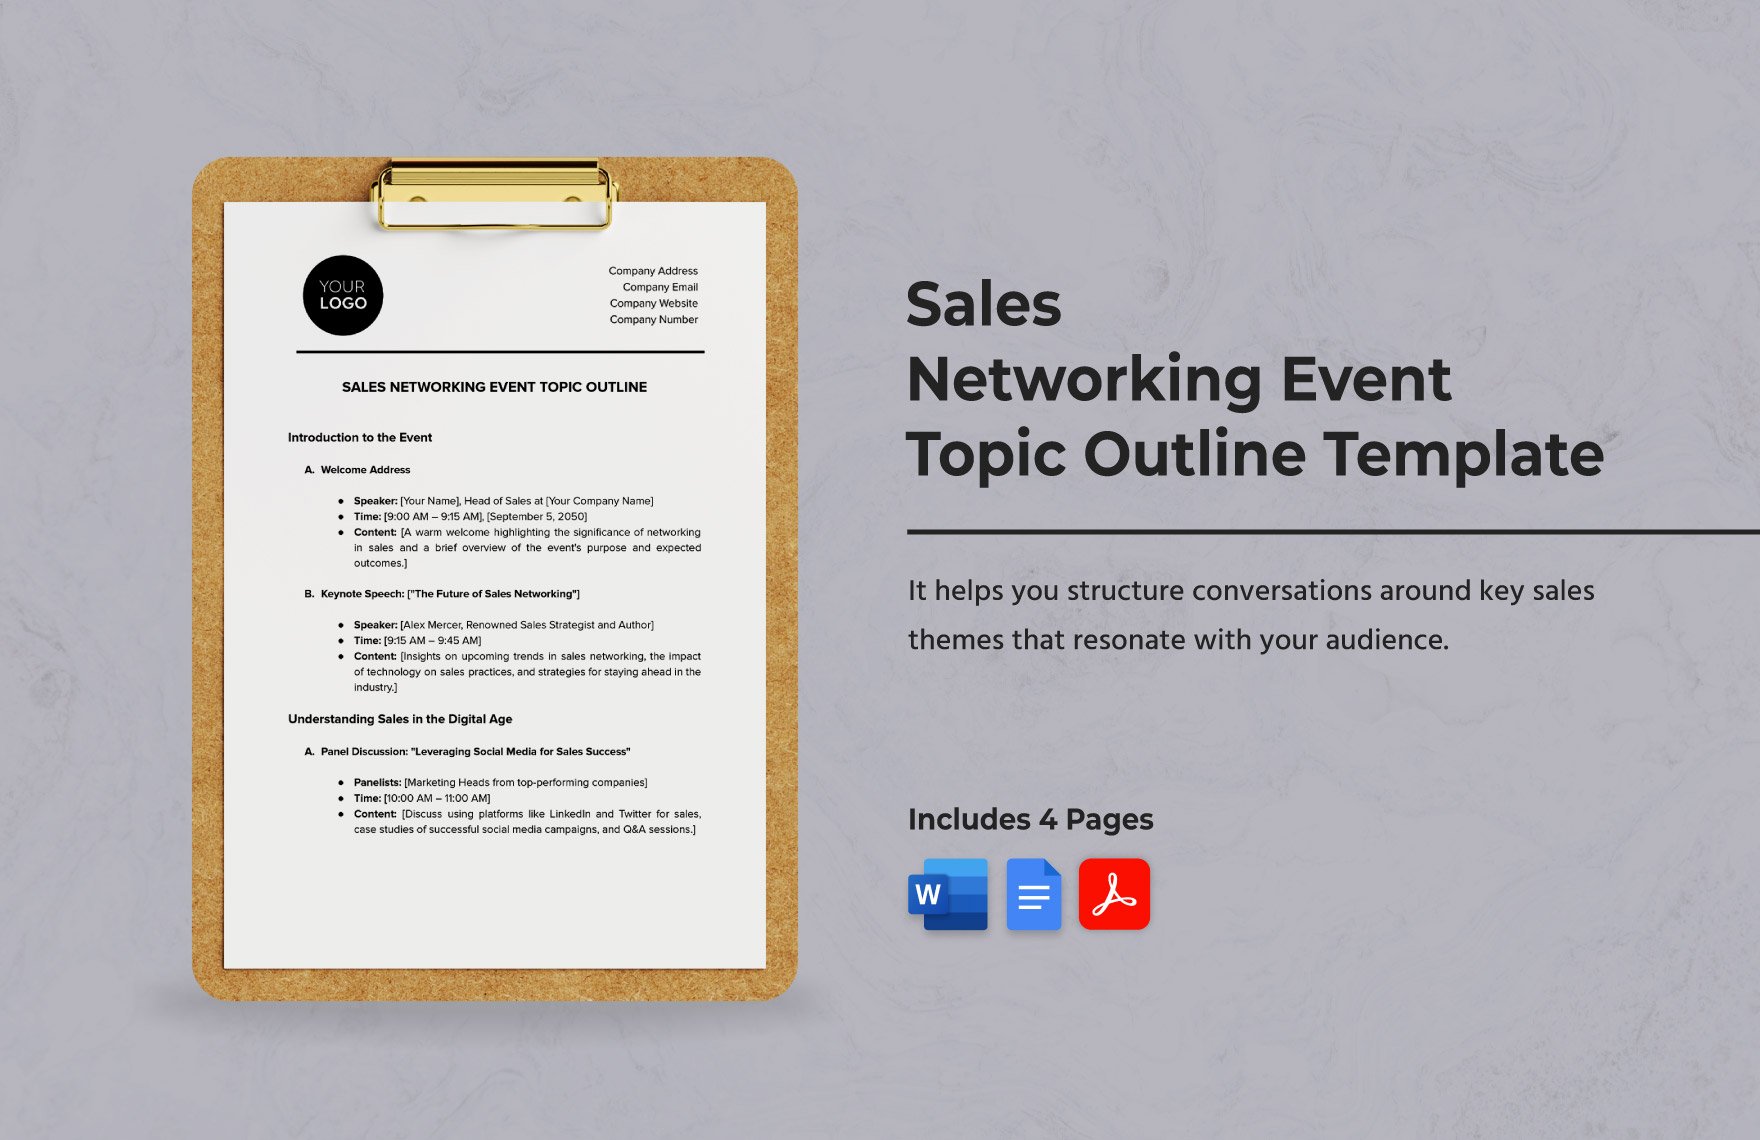 Sales Networking Event Topic Outline Template